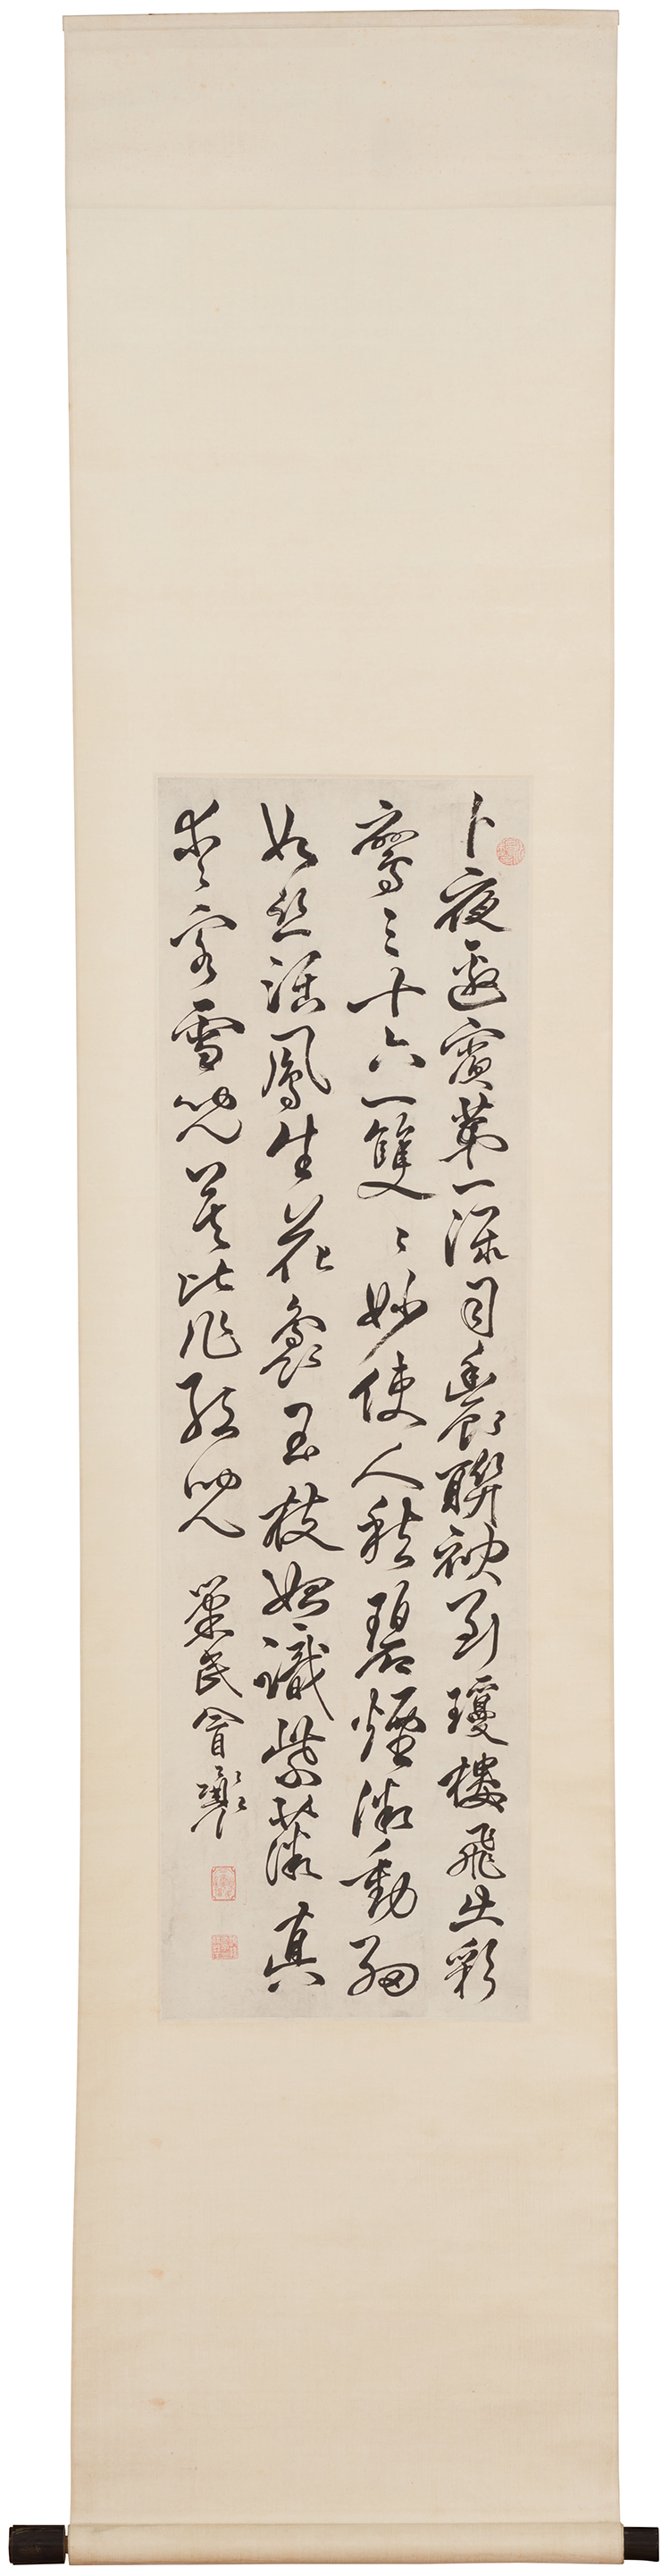 Calligraphy Scroll in Cursive Script par Attributed to Mao Xiang